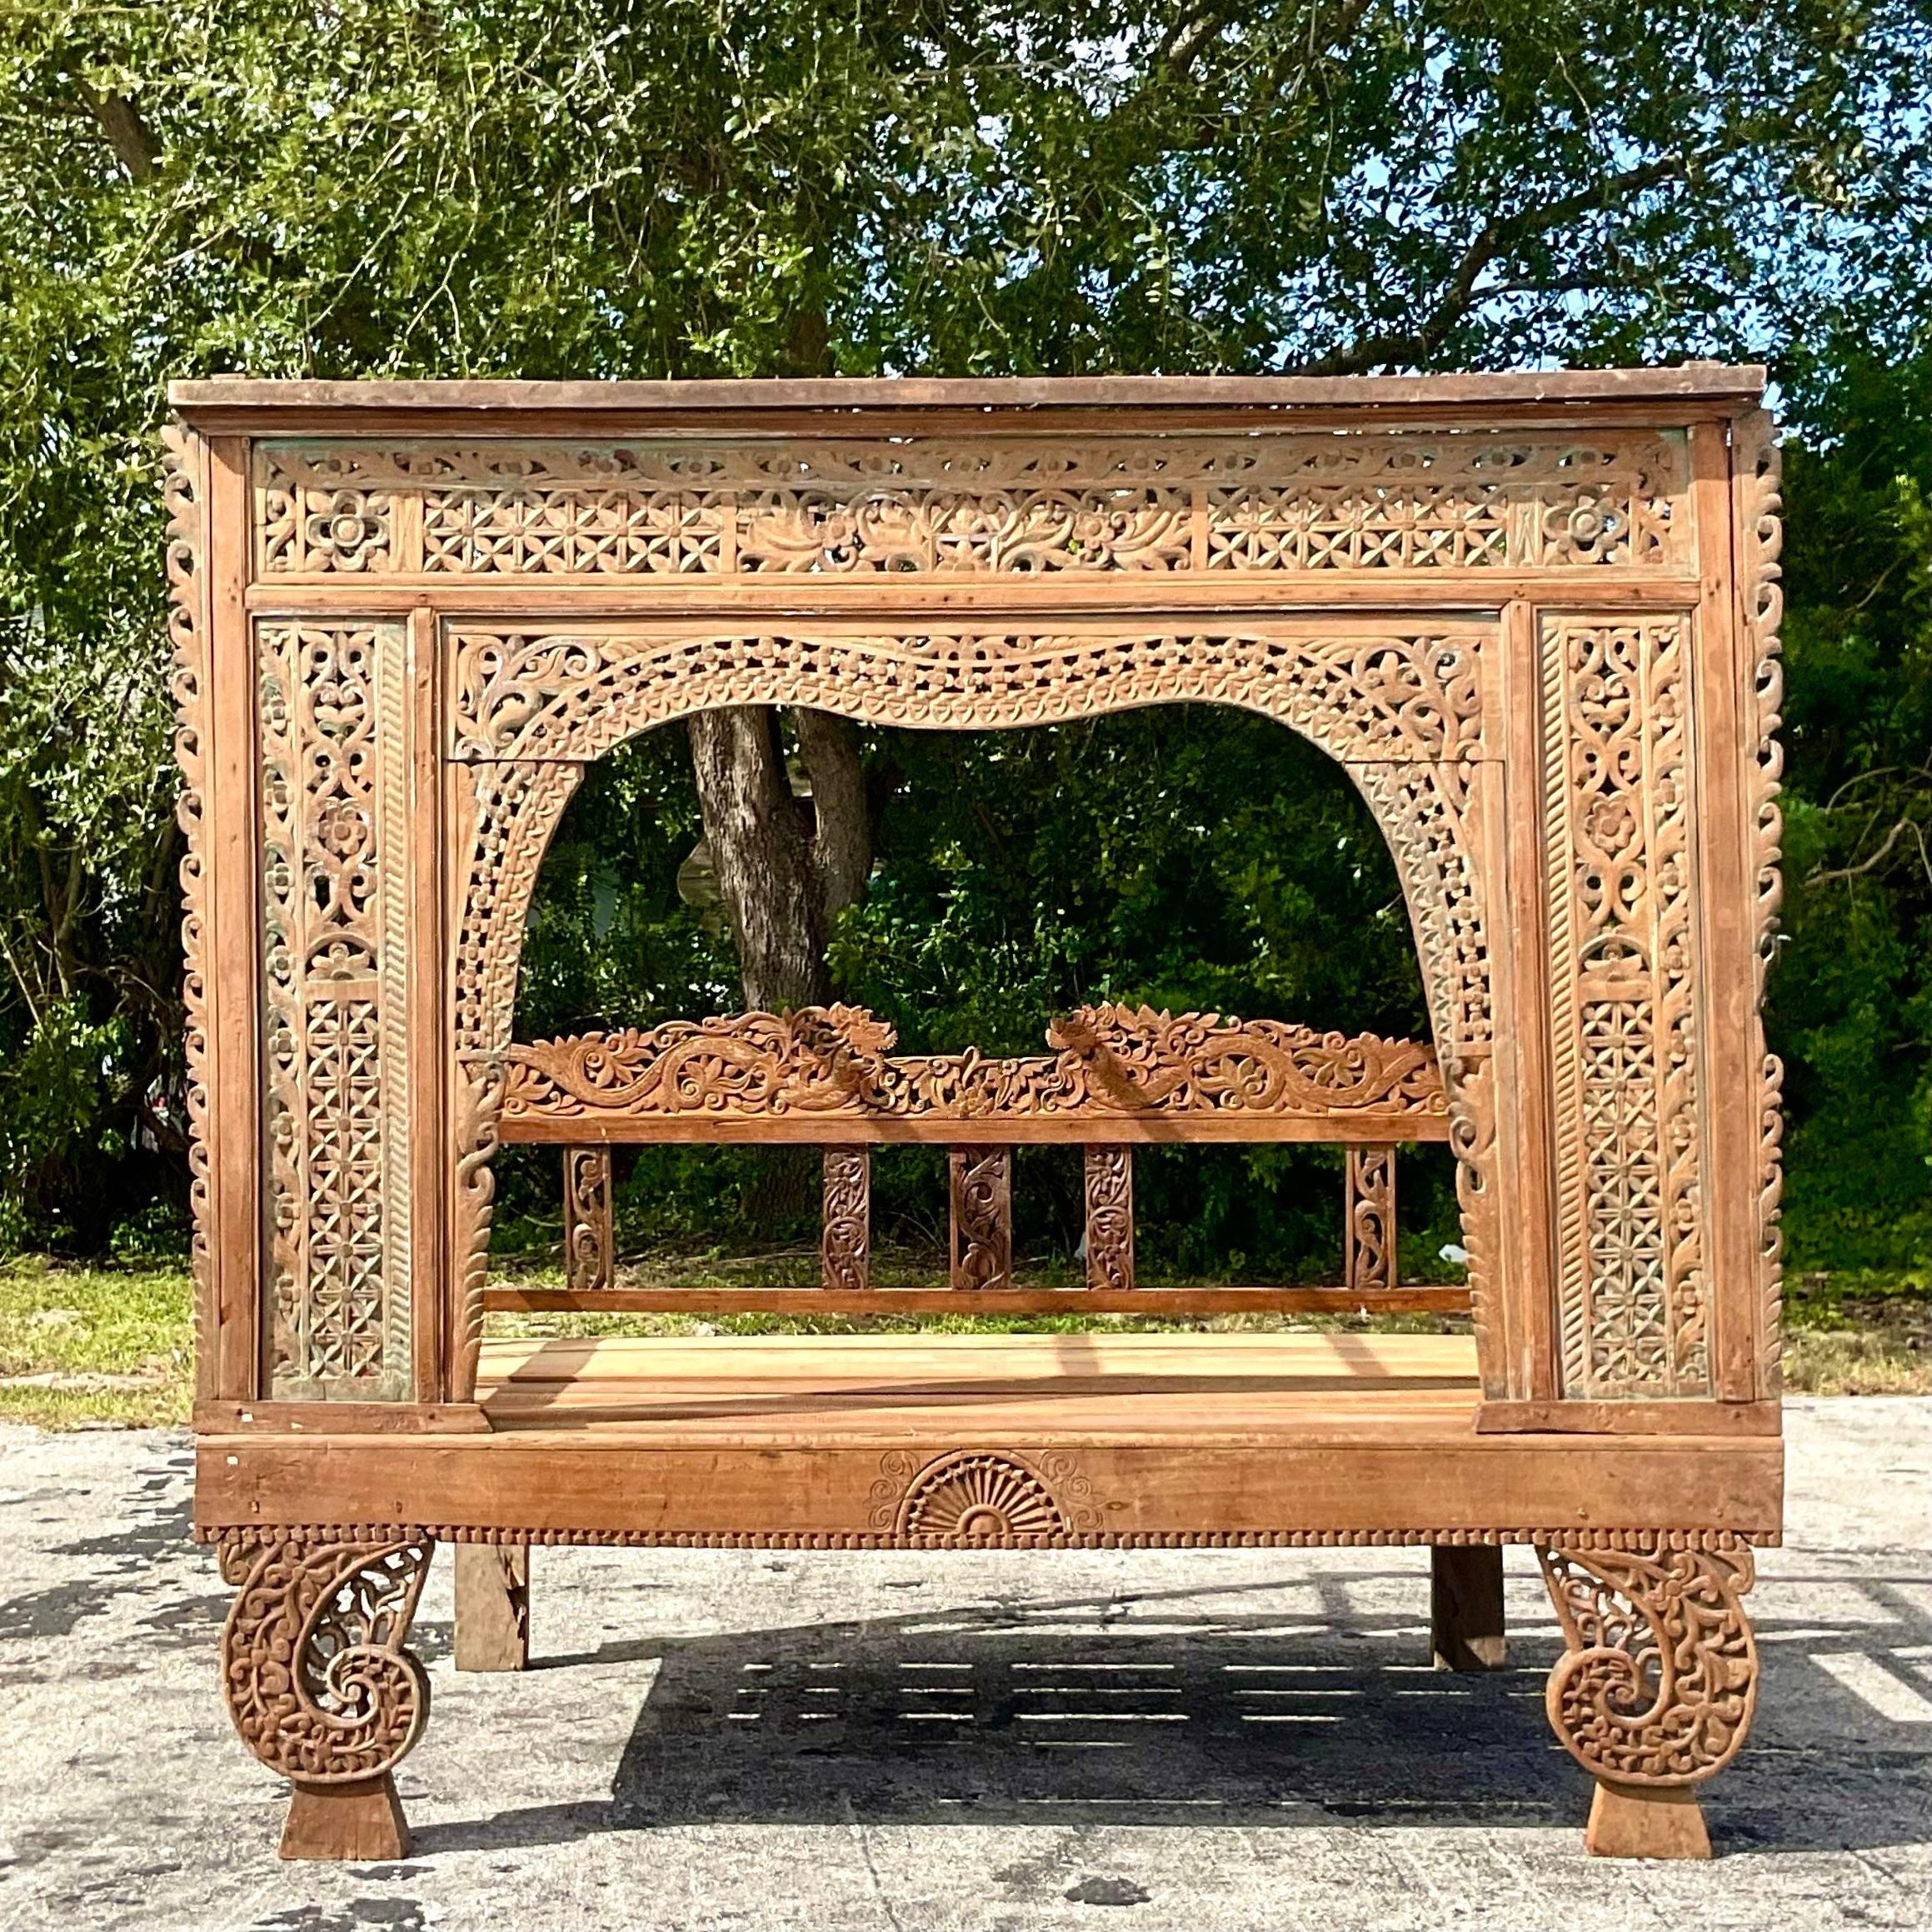 A fabulous vintage Boho Opium bed. A chic hand carved teak forms with faded hand painted detail. A special private hideaway. Acquired from a Palm Beach estate.